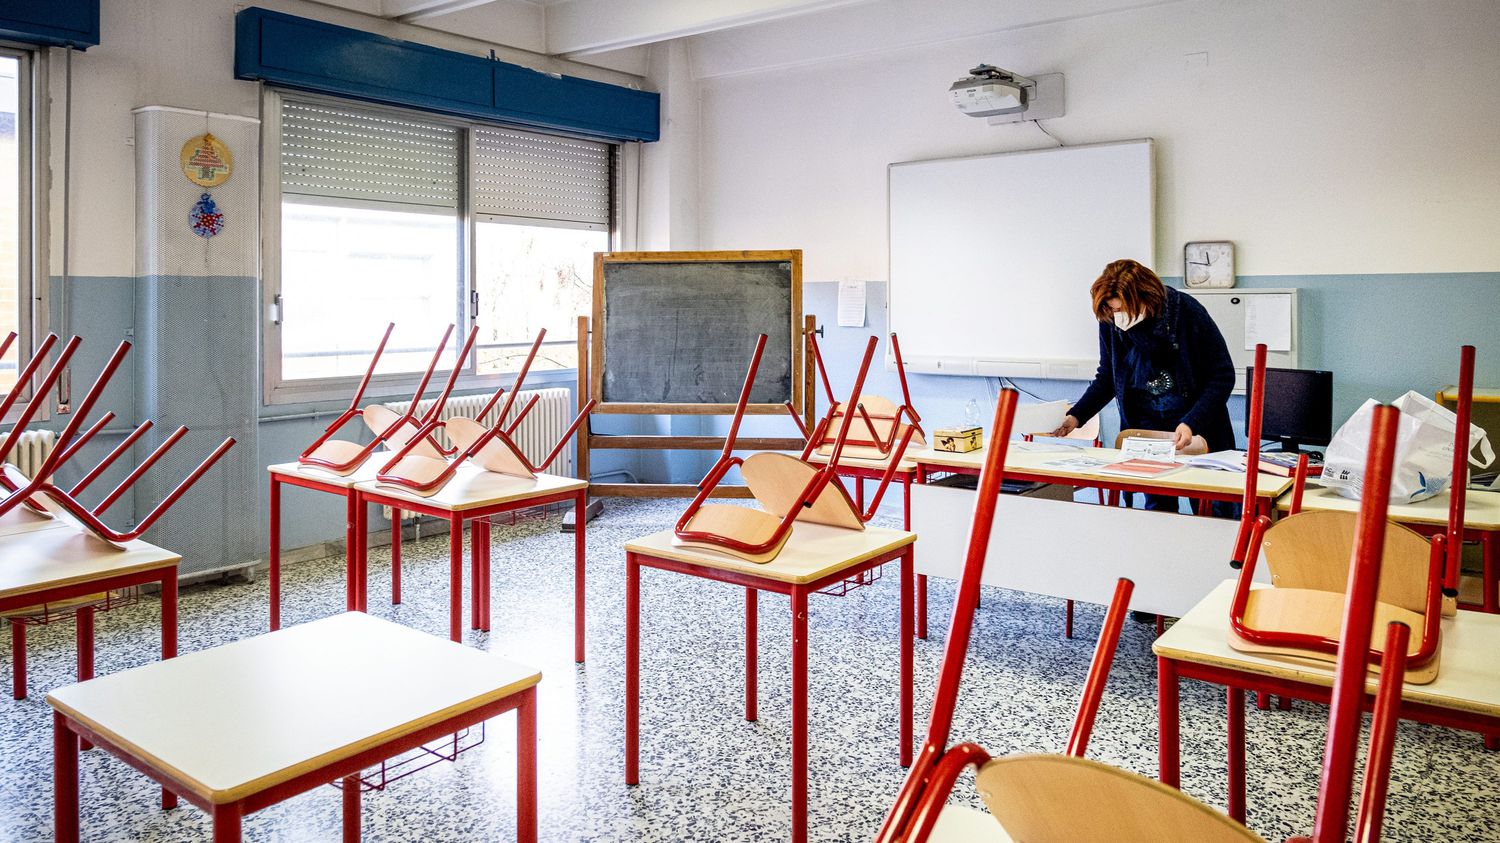 'That would be madness': Italy's government plans to pay teachers based on the cost of living in their region
